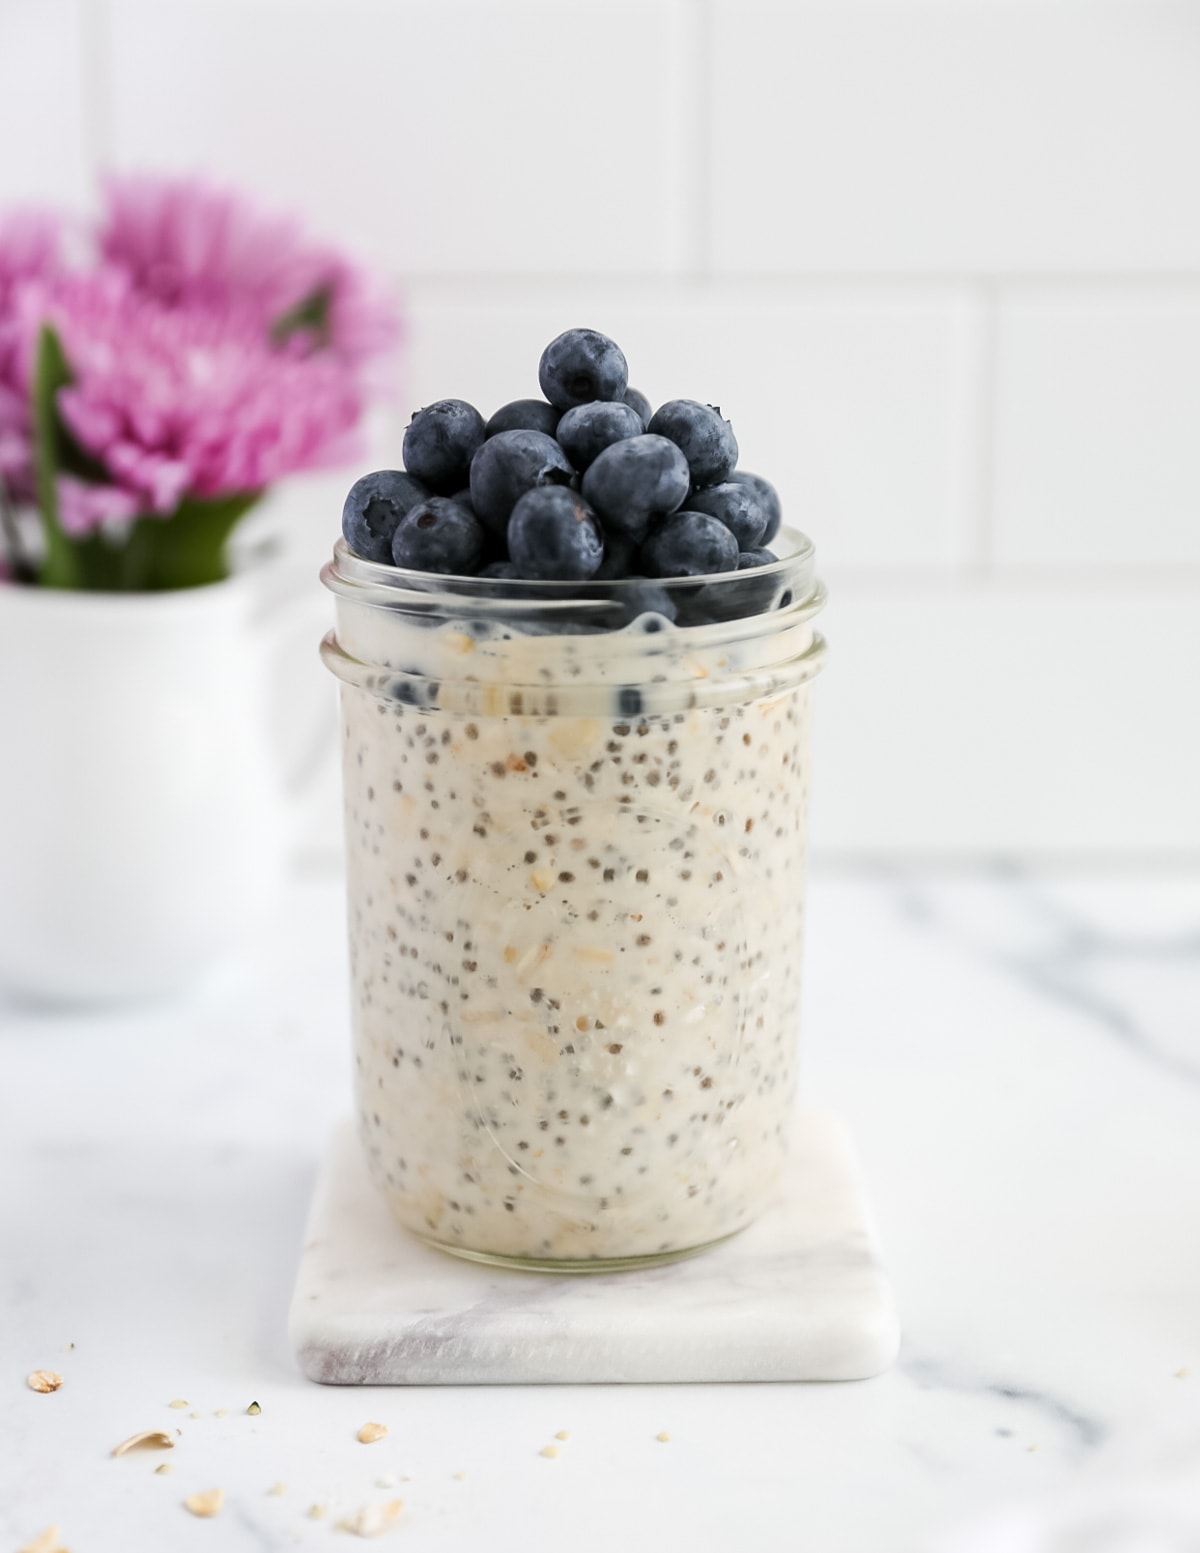 A side shot of oats in a jar with blueberries on top